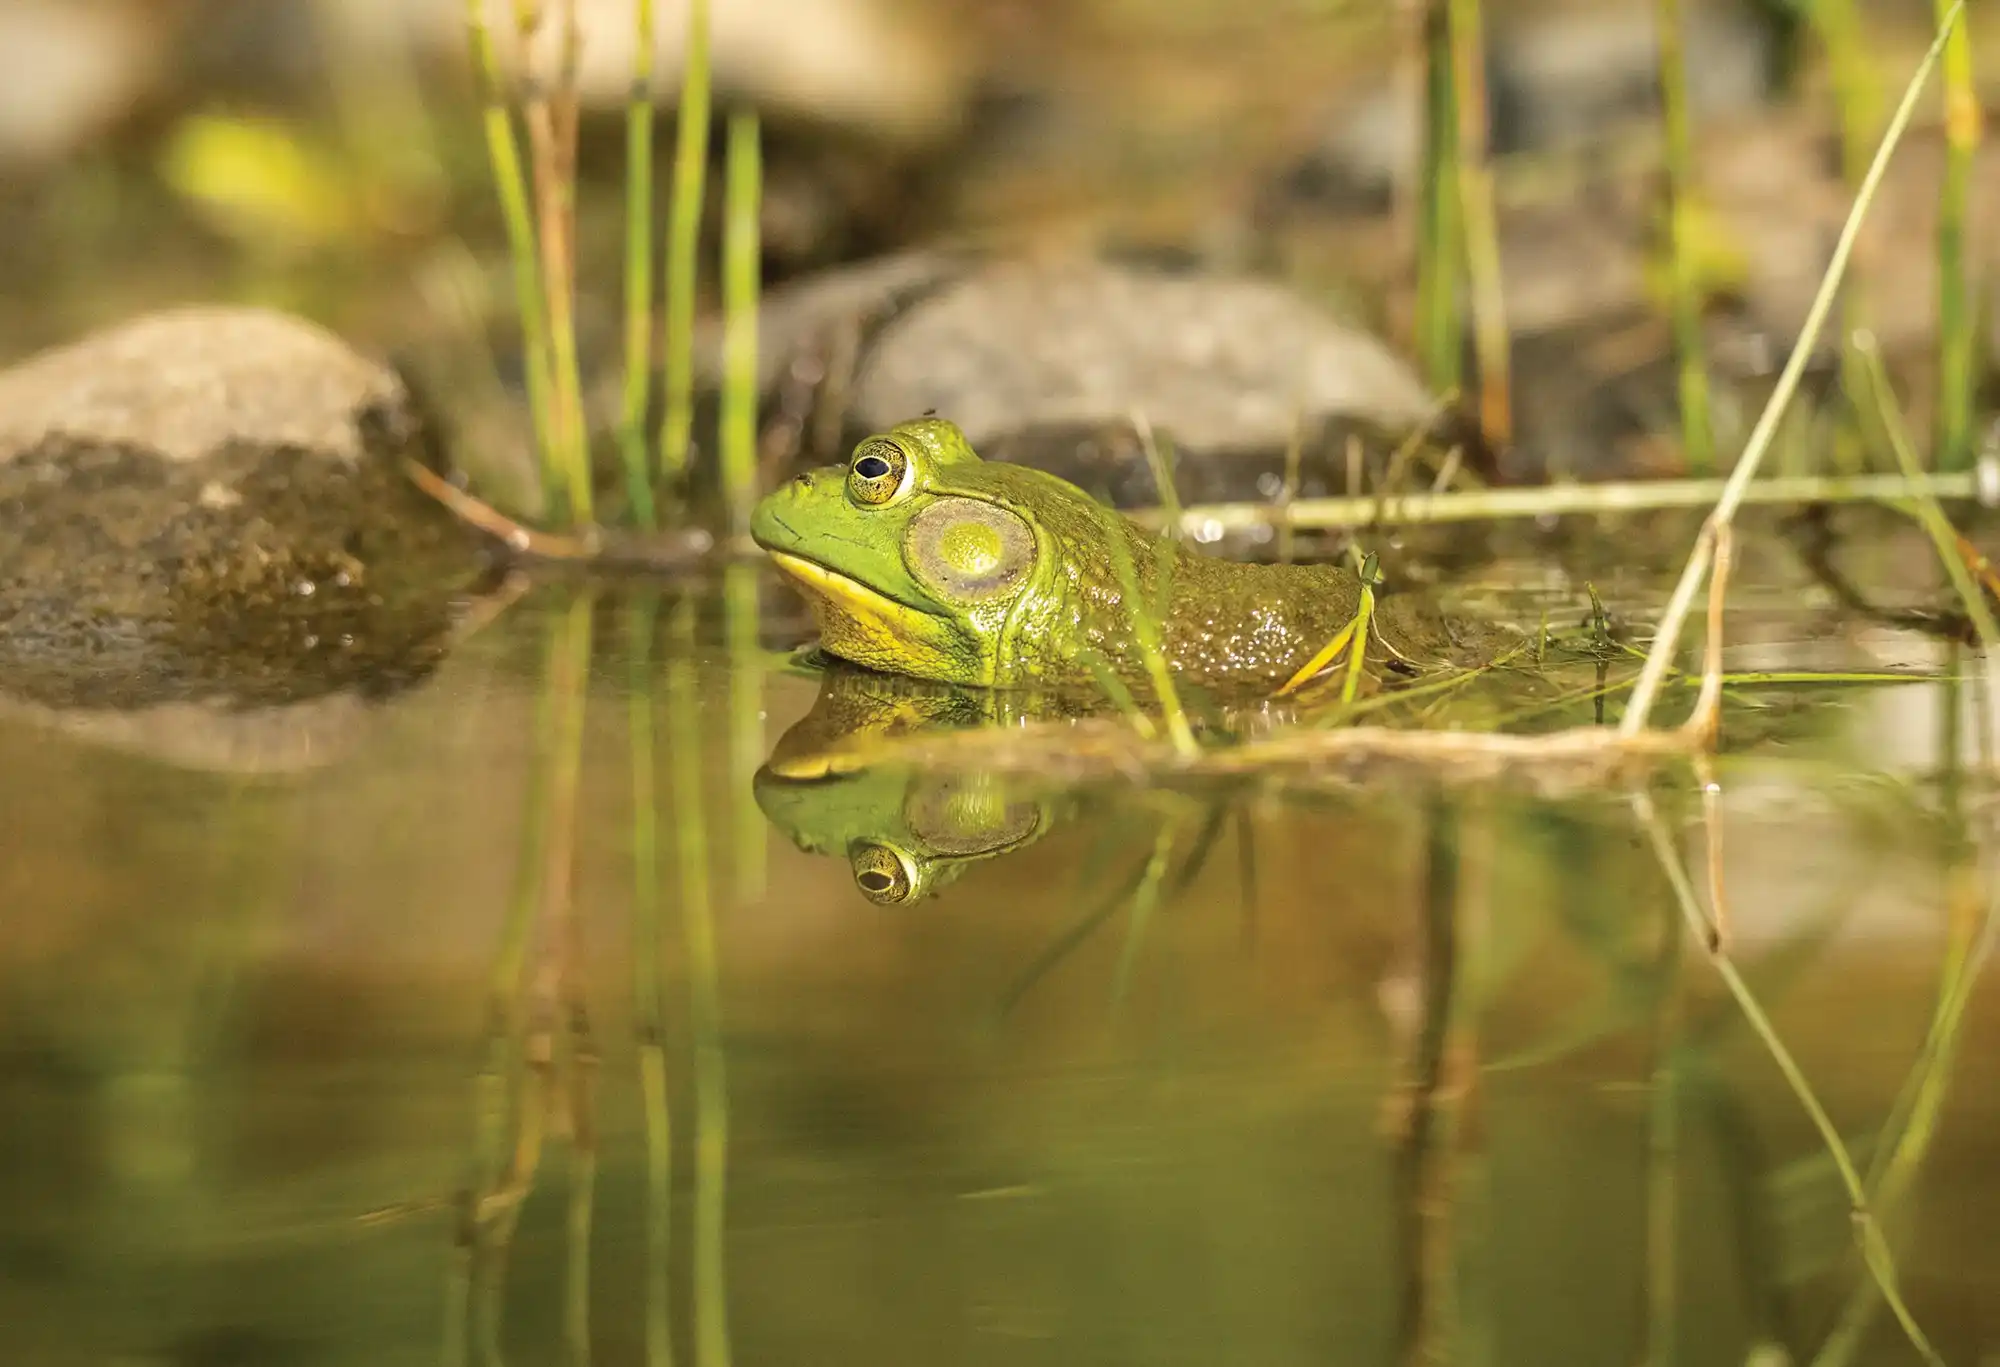 An up close view of a green and yellow american bullfrog half submerged in water